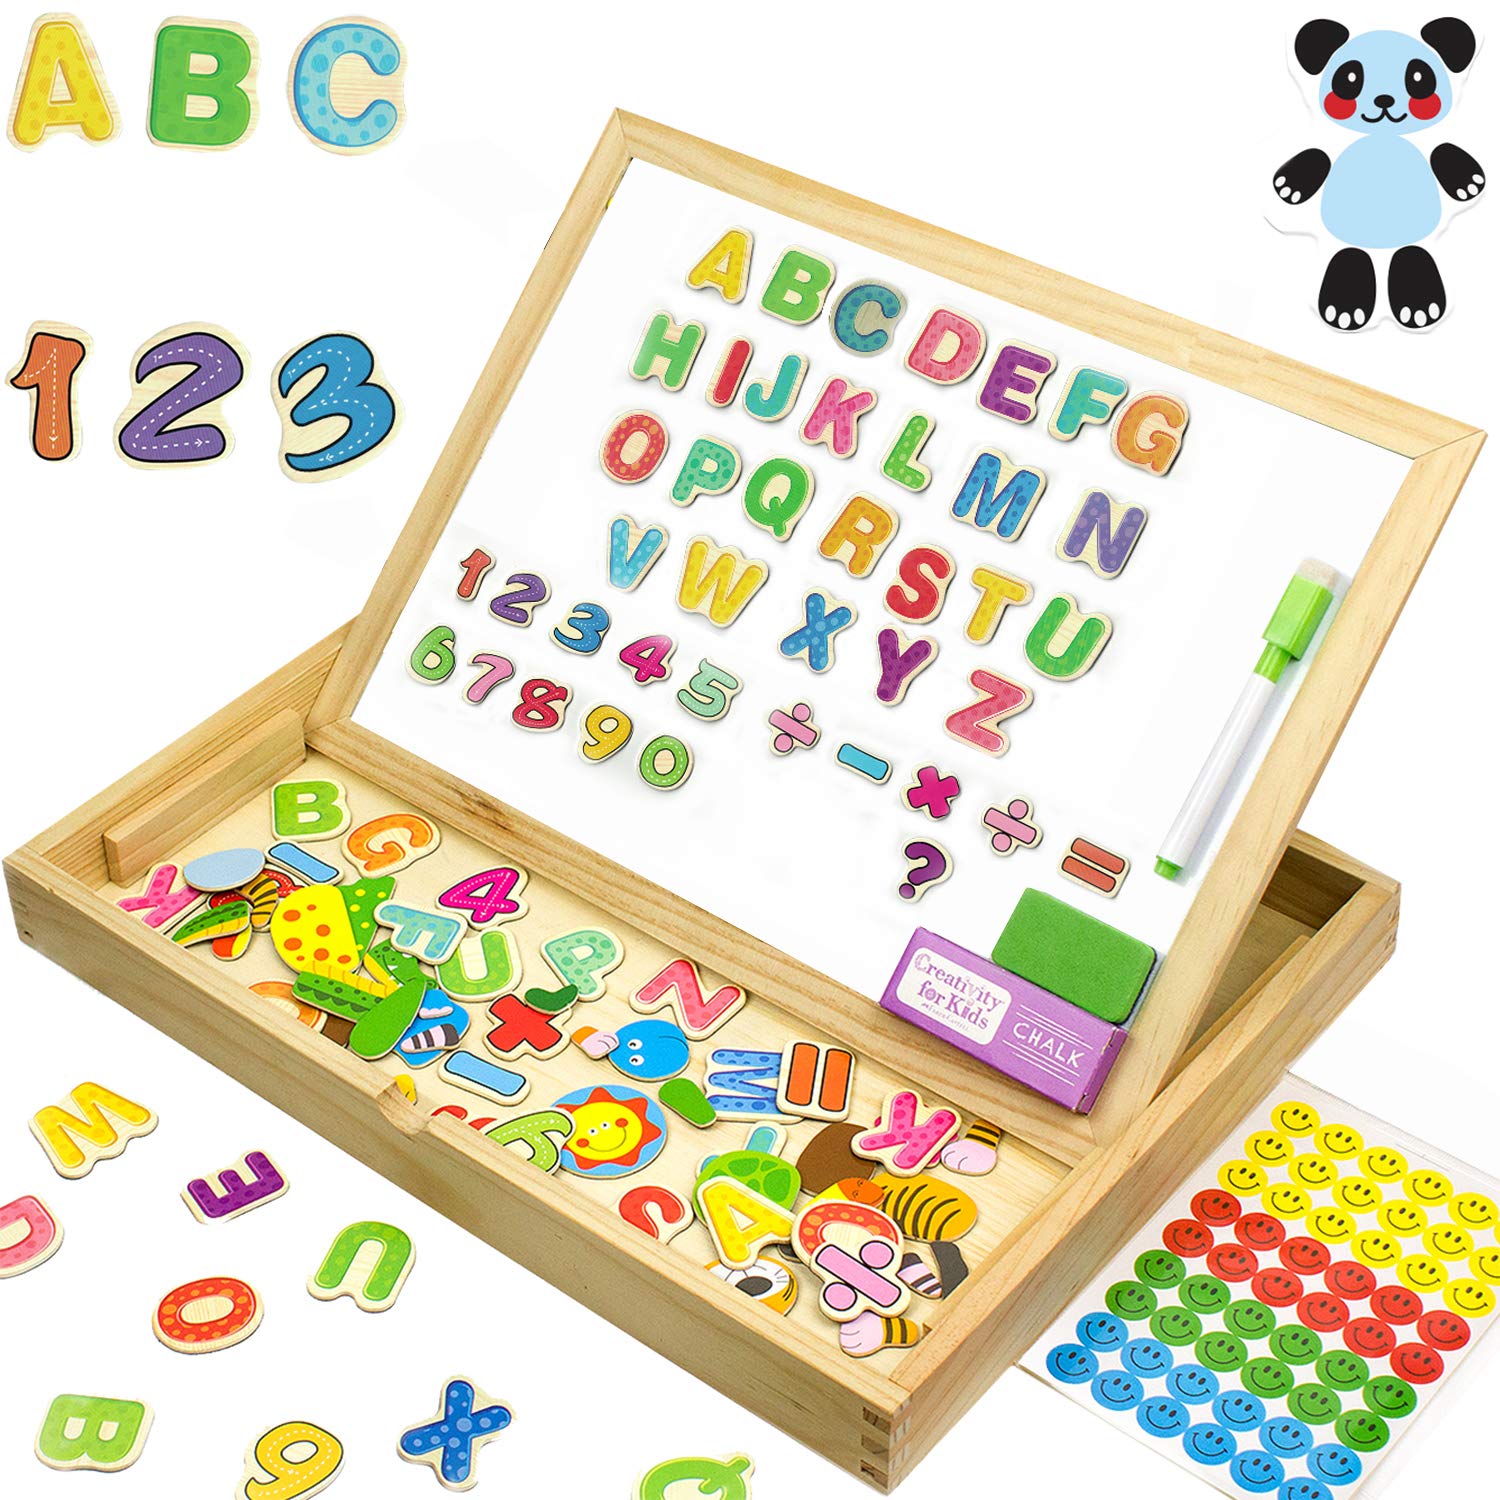 Back to School Essentials for little kids - Magnetic Letter Board